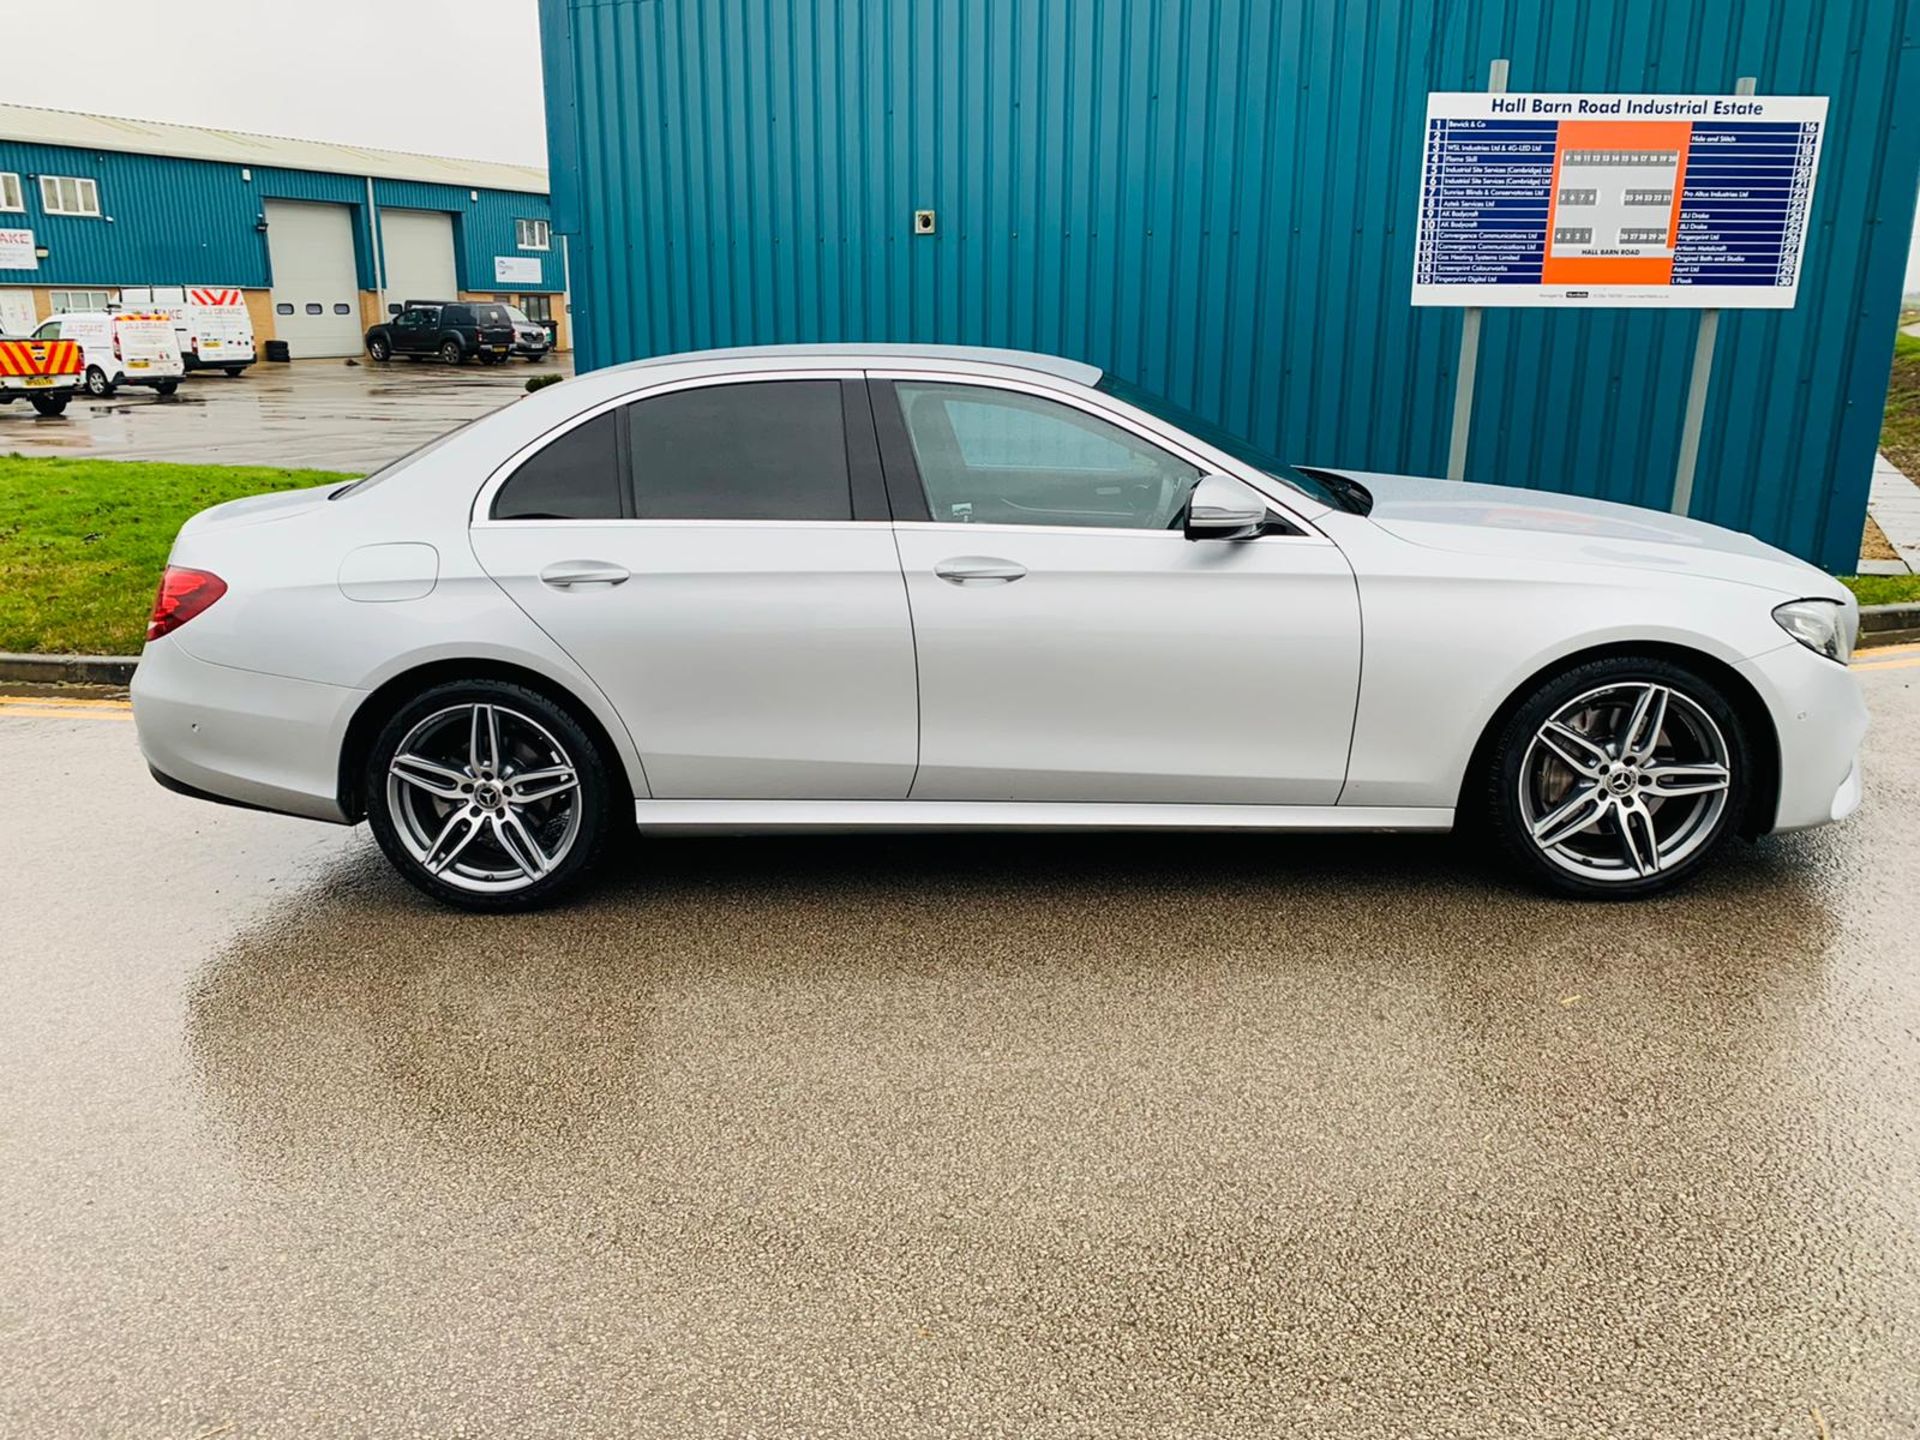 (RESERVE MET) Mercedes E220d AMG Line Auto 9G Tronic - 2019 Reg - Reversing Cam - 1 Owner From New - Image 2 of 30